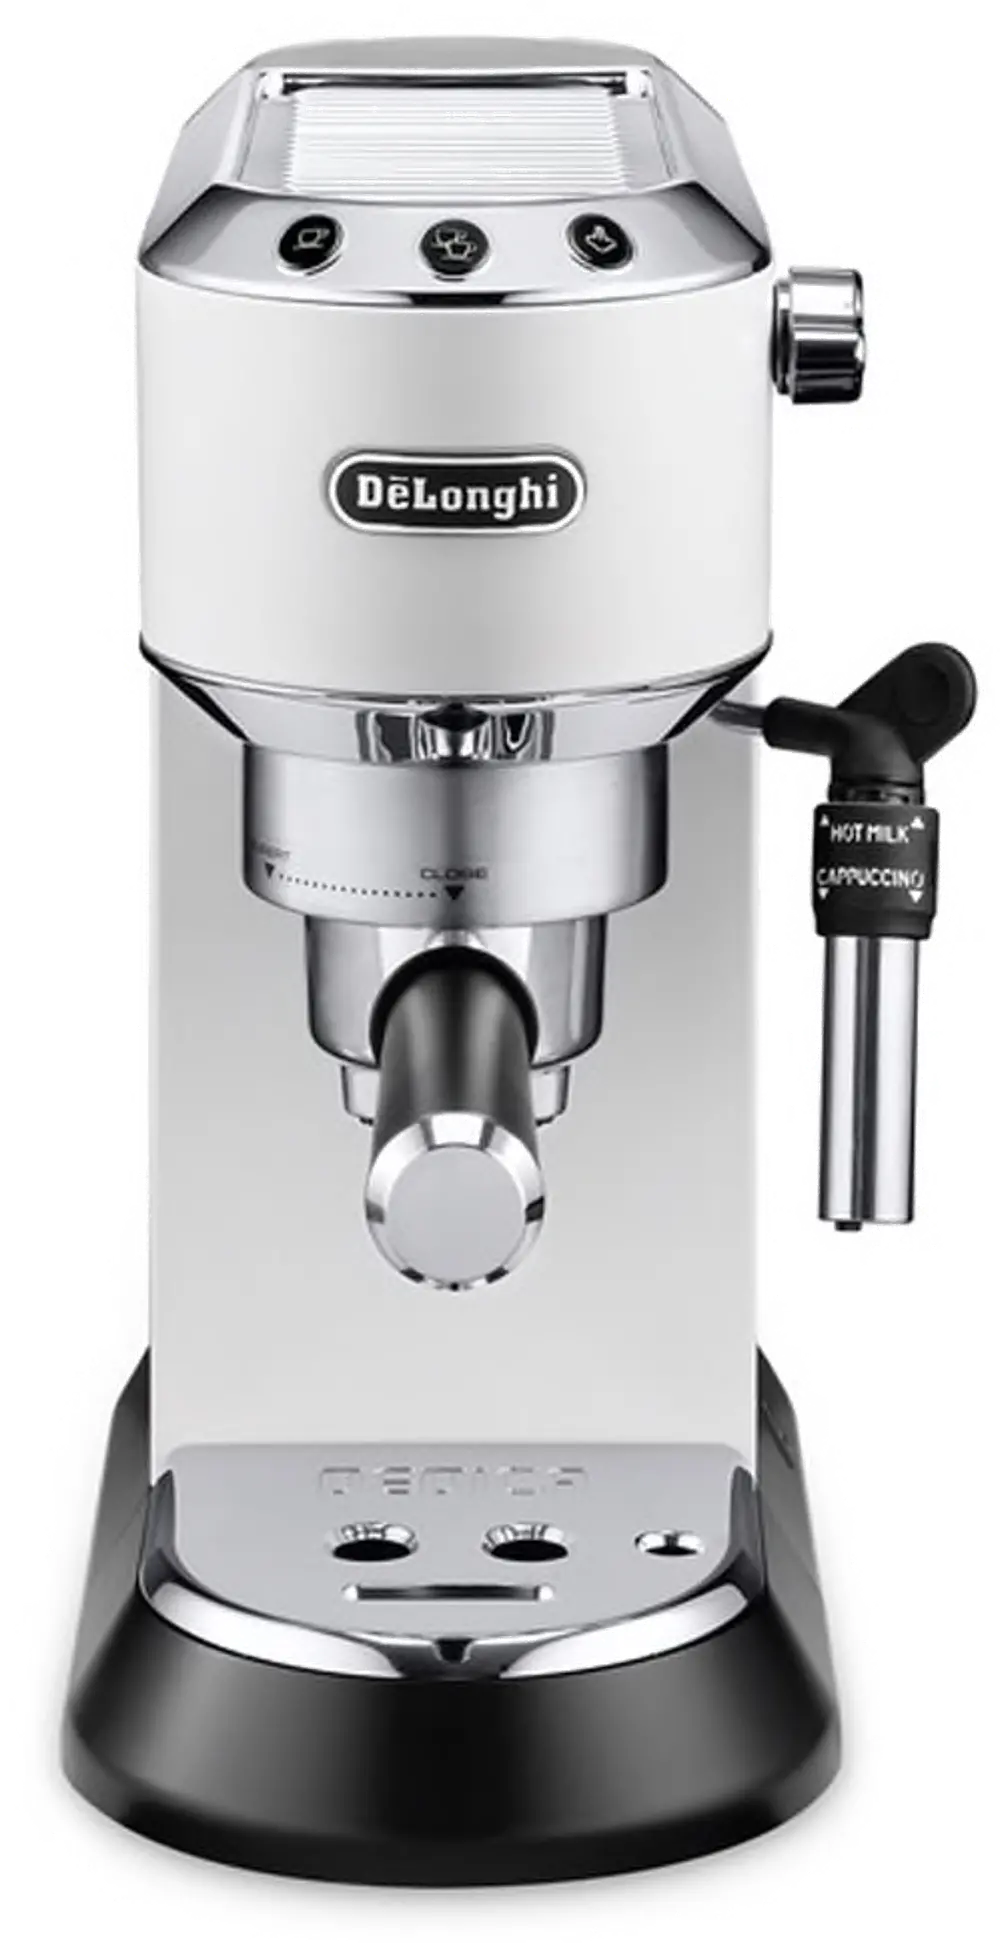 EC685M De'Longhi Espresso and Cappuccino Maker - Stainless Steel-1